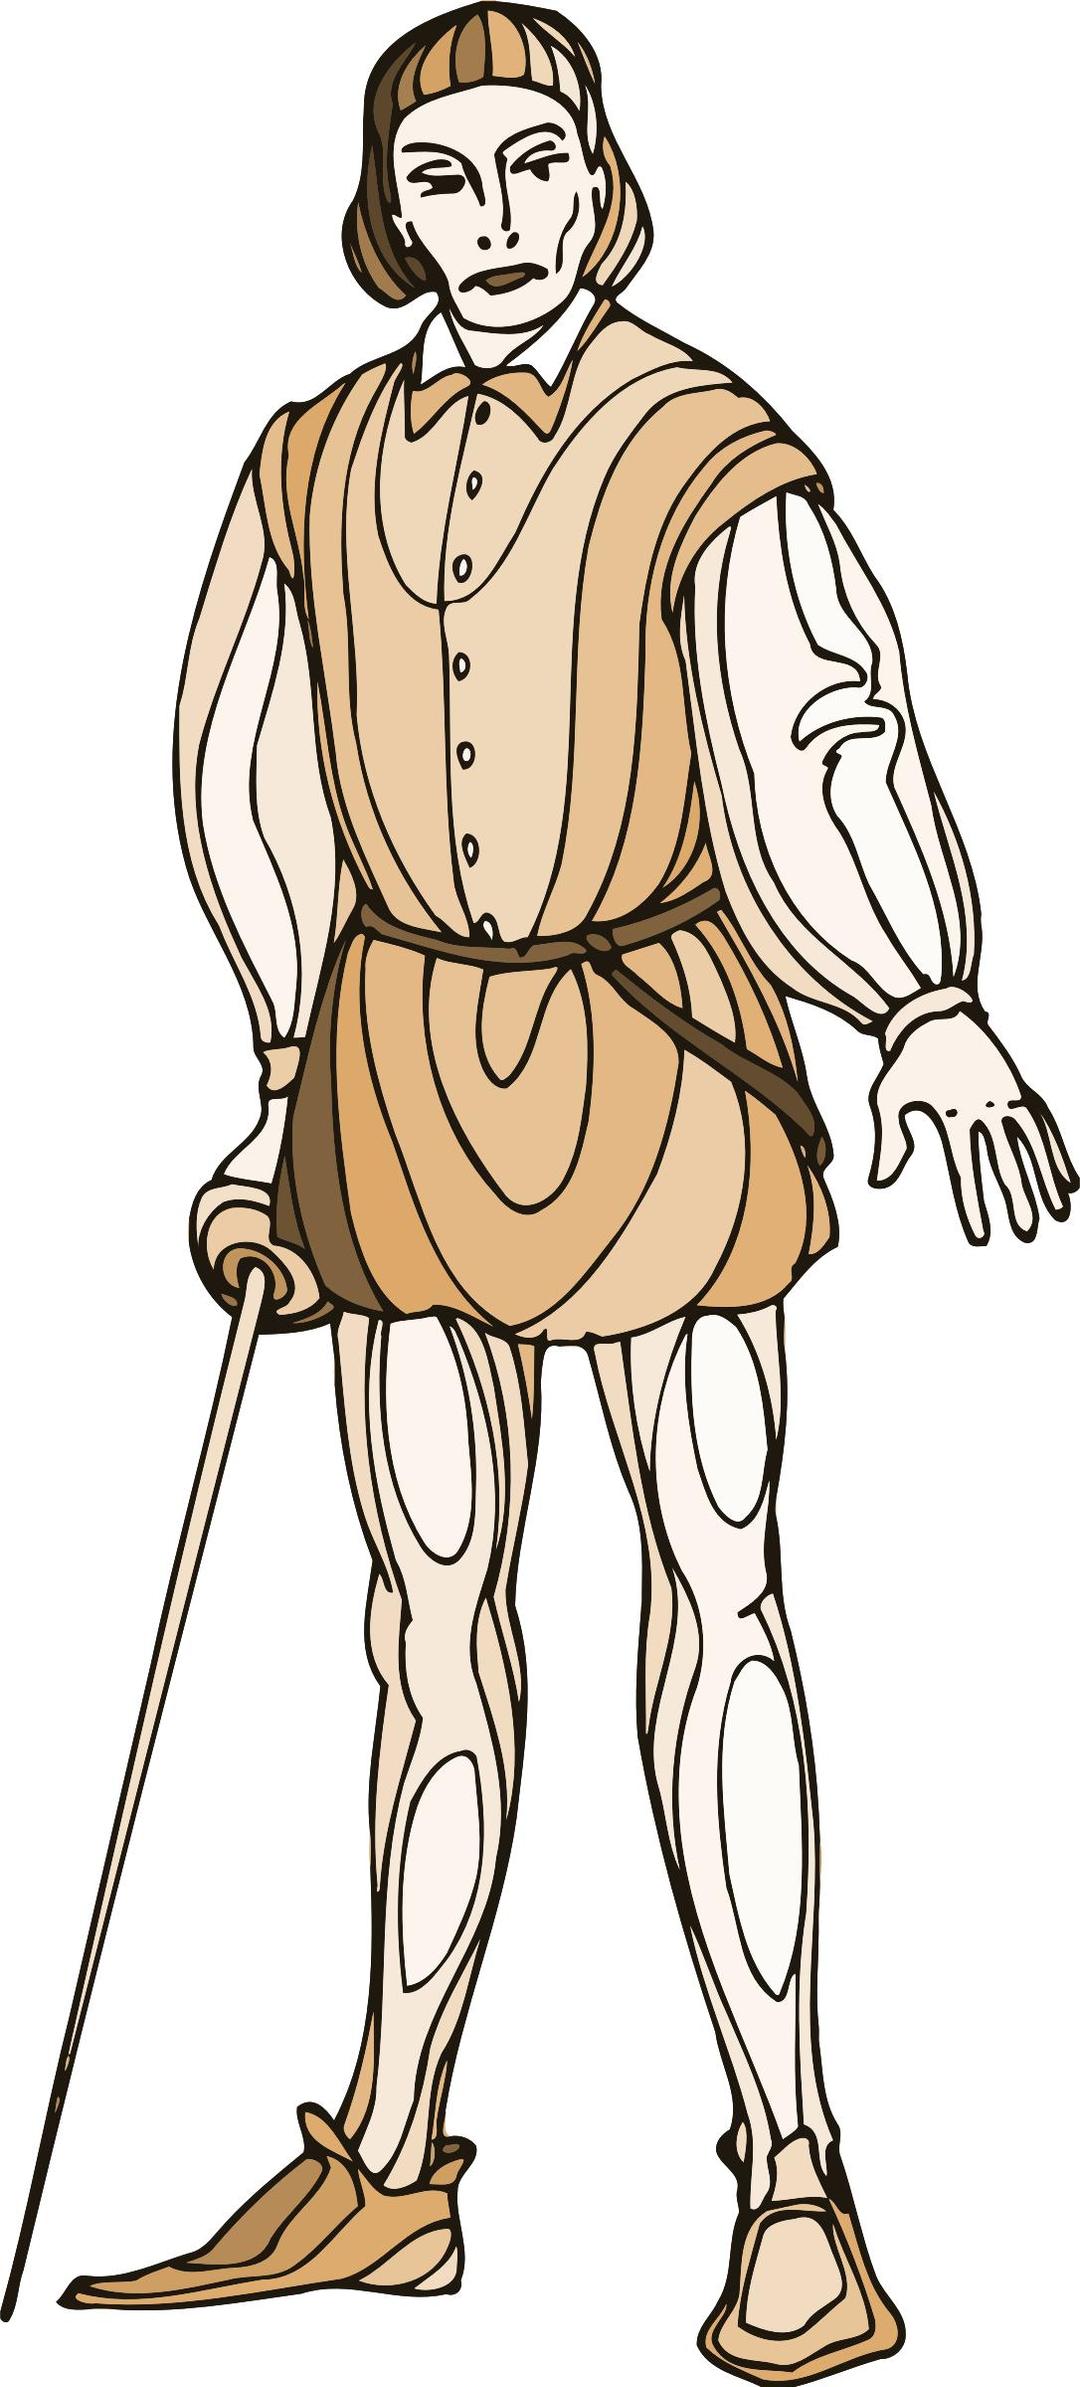 Shakespeare characters - Laertes png transparent